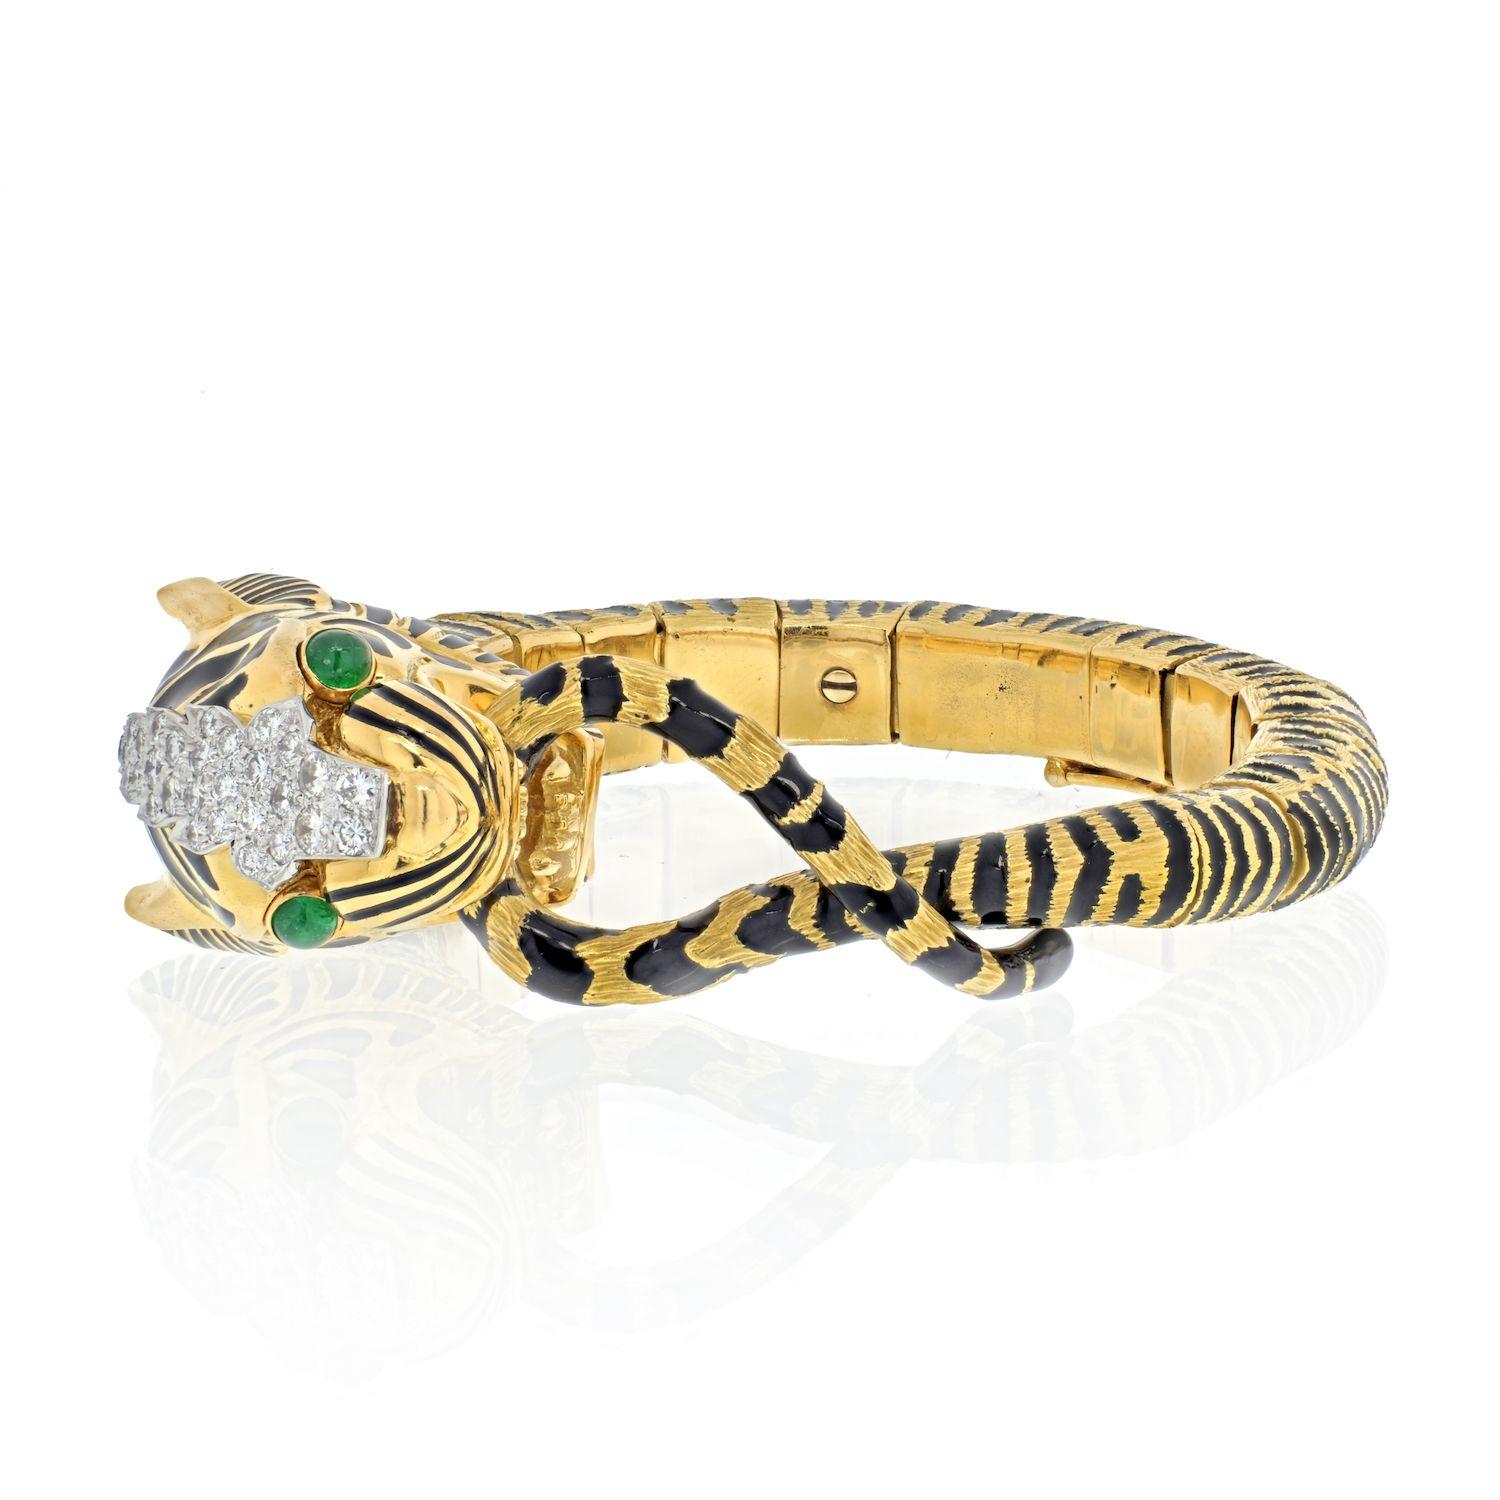 A stunning bracelet by David Webb from the Kingdom collection!
Tiger bracelet that is mostly made in 18k yellow gold with black enameling accross his body as stripes and diamond collar around his neck. 
His eyes are mounted with green emeralds and